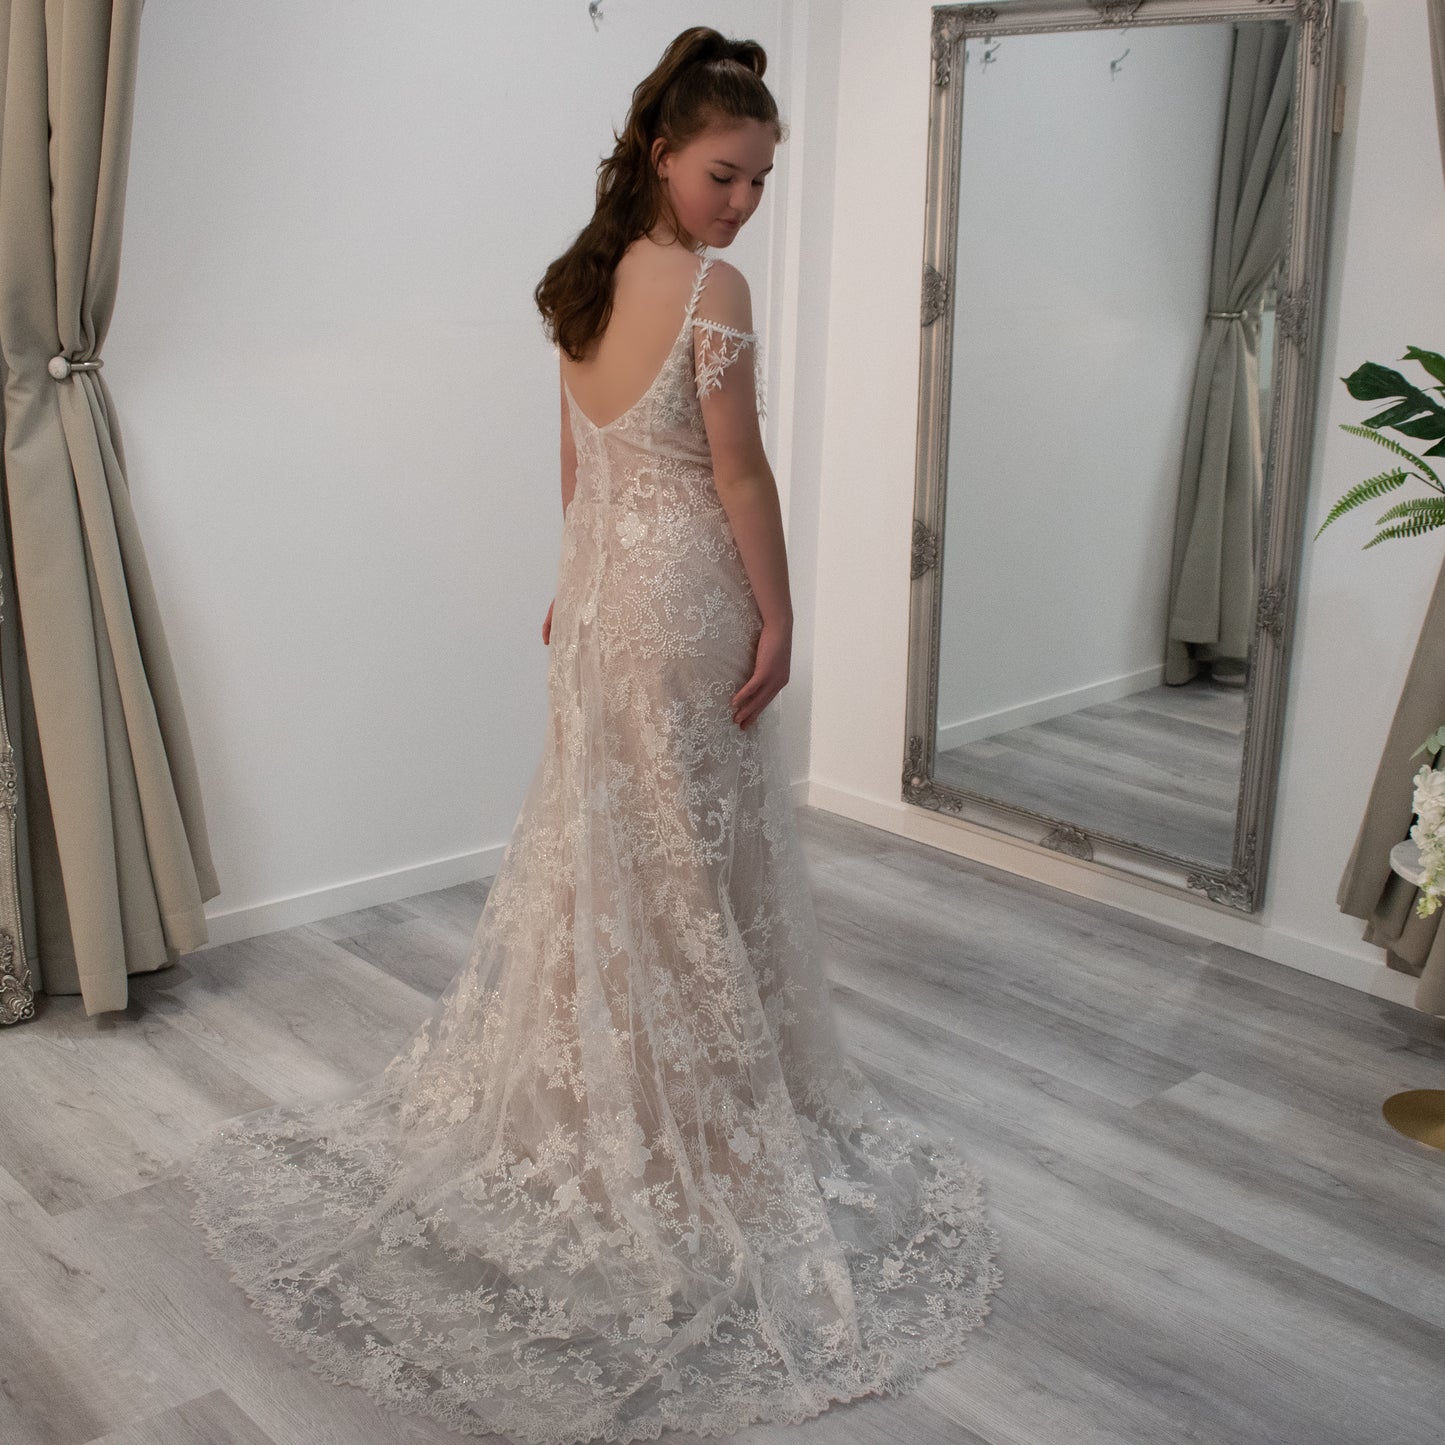 Bride in Koral wedding gown, showcasing the V-neckline, lace detailing, and the enchanting train.